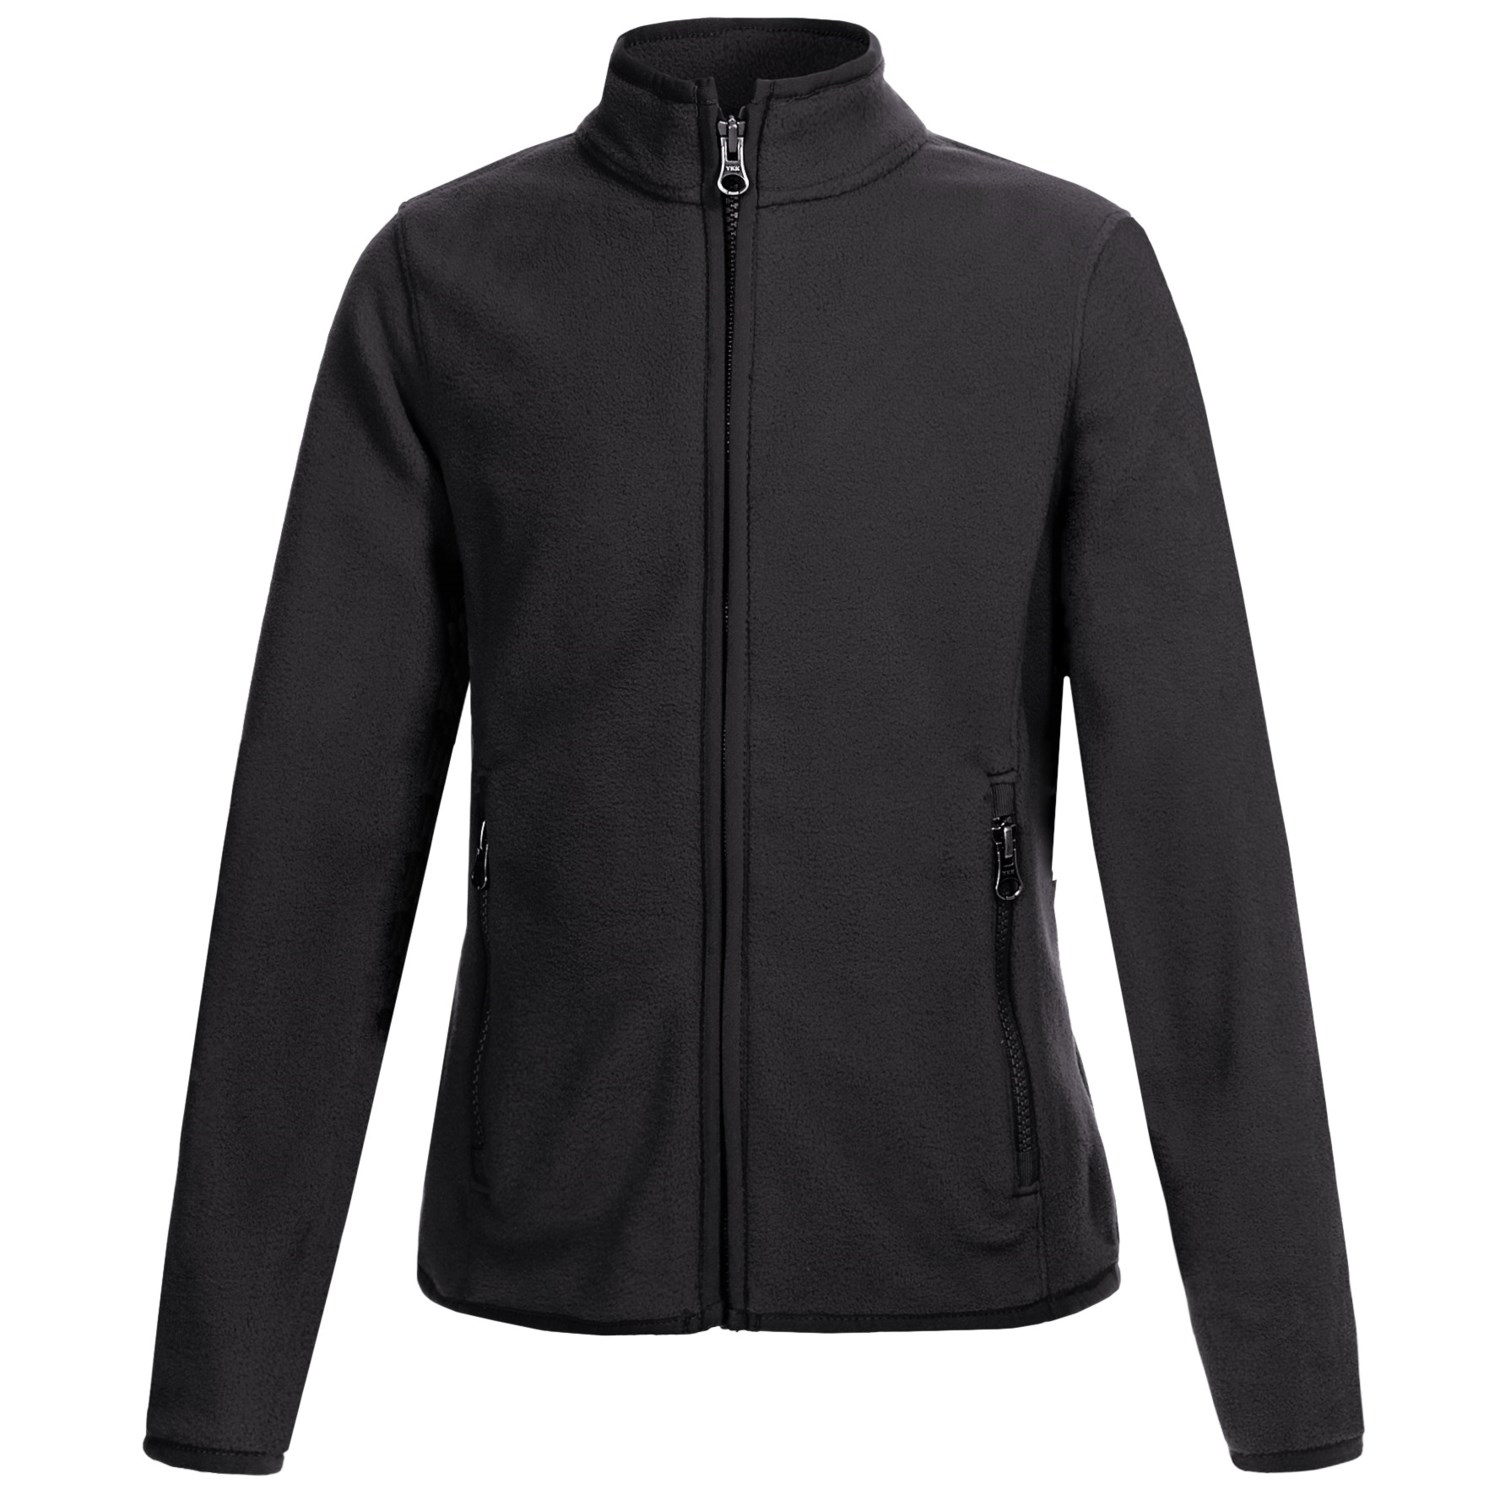 Double-Sided Fleece Jacket (For Girls) - Save 51%